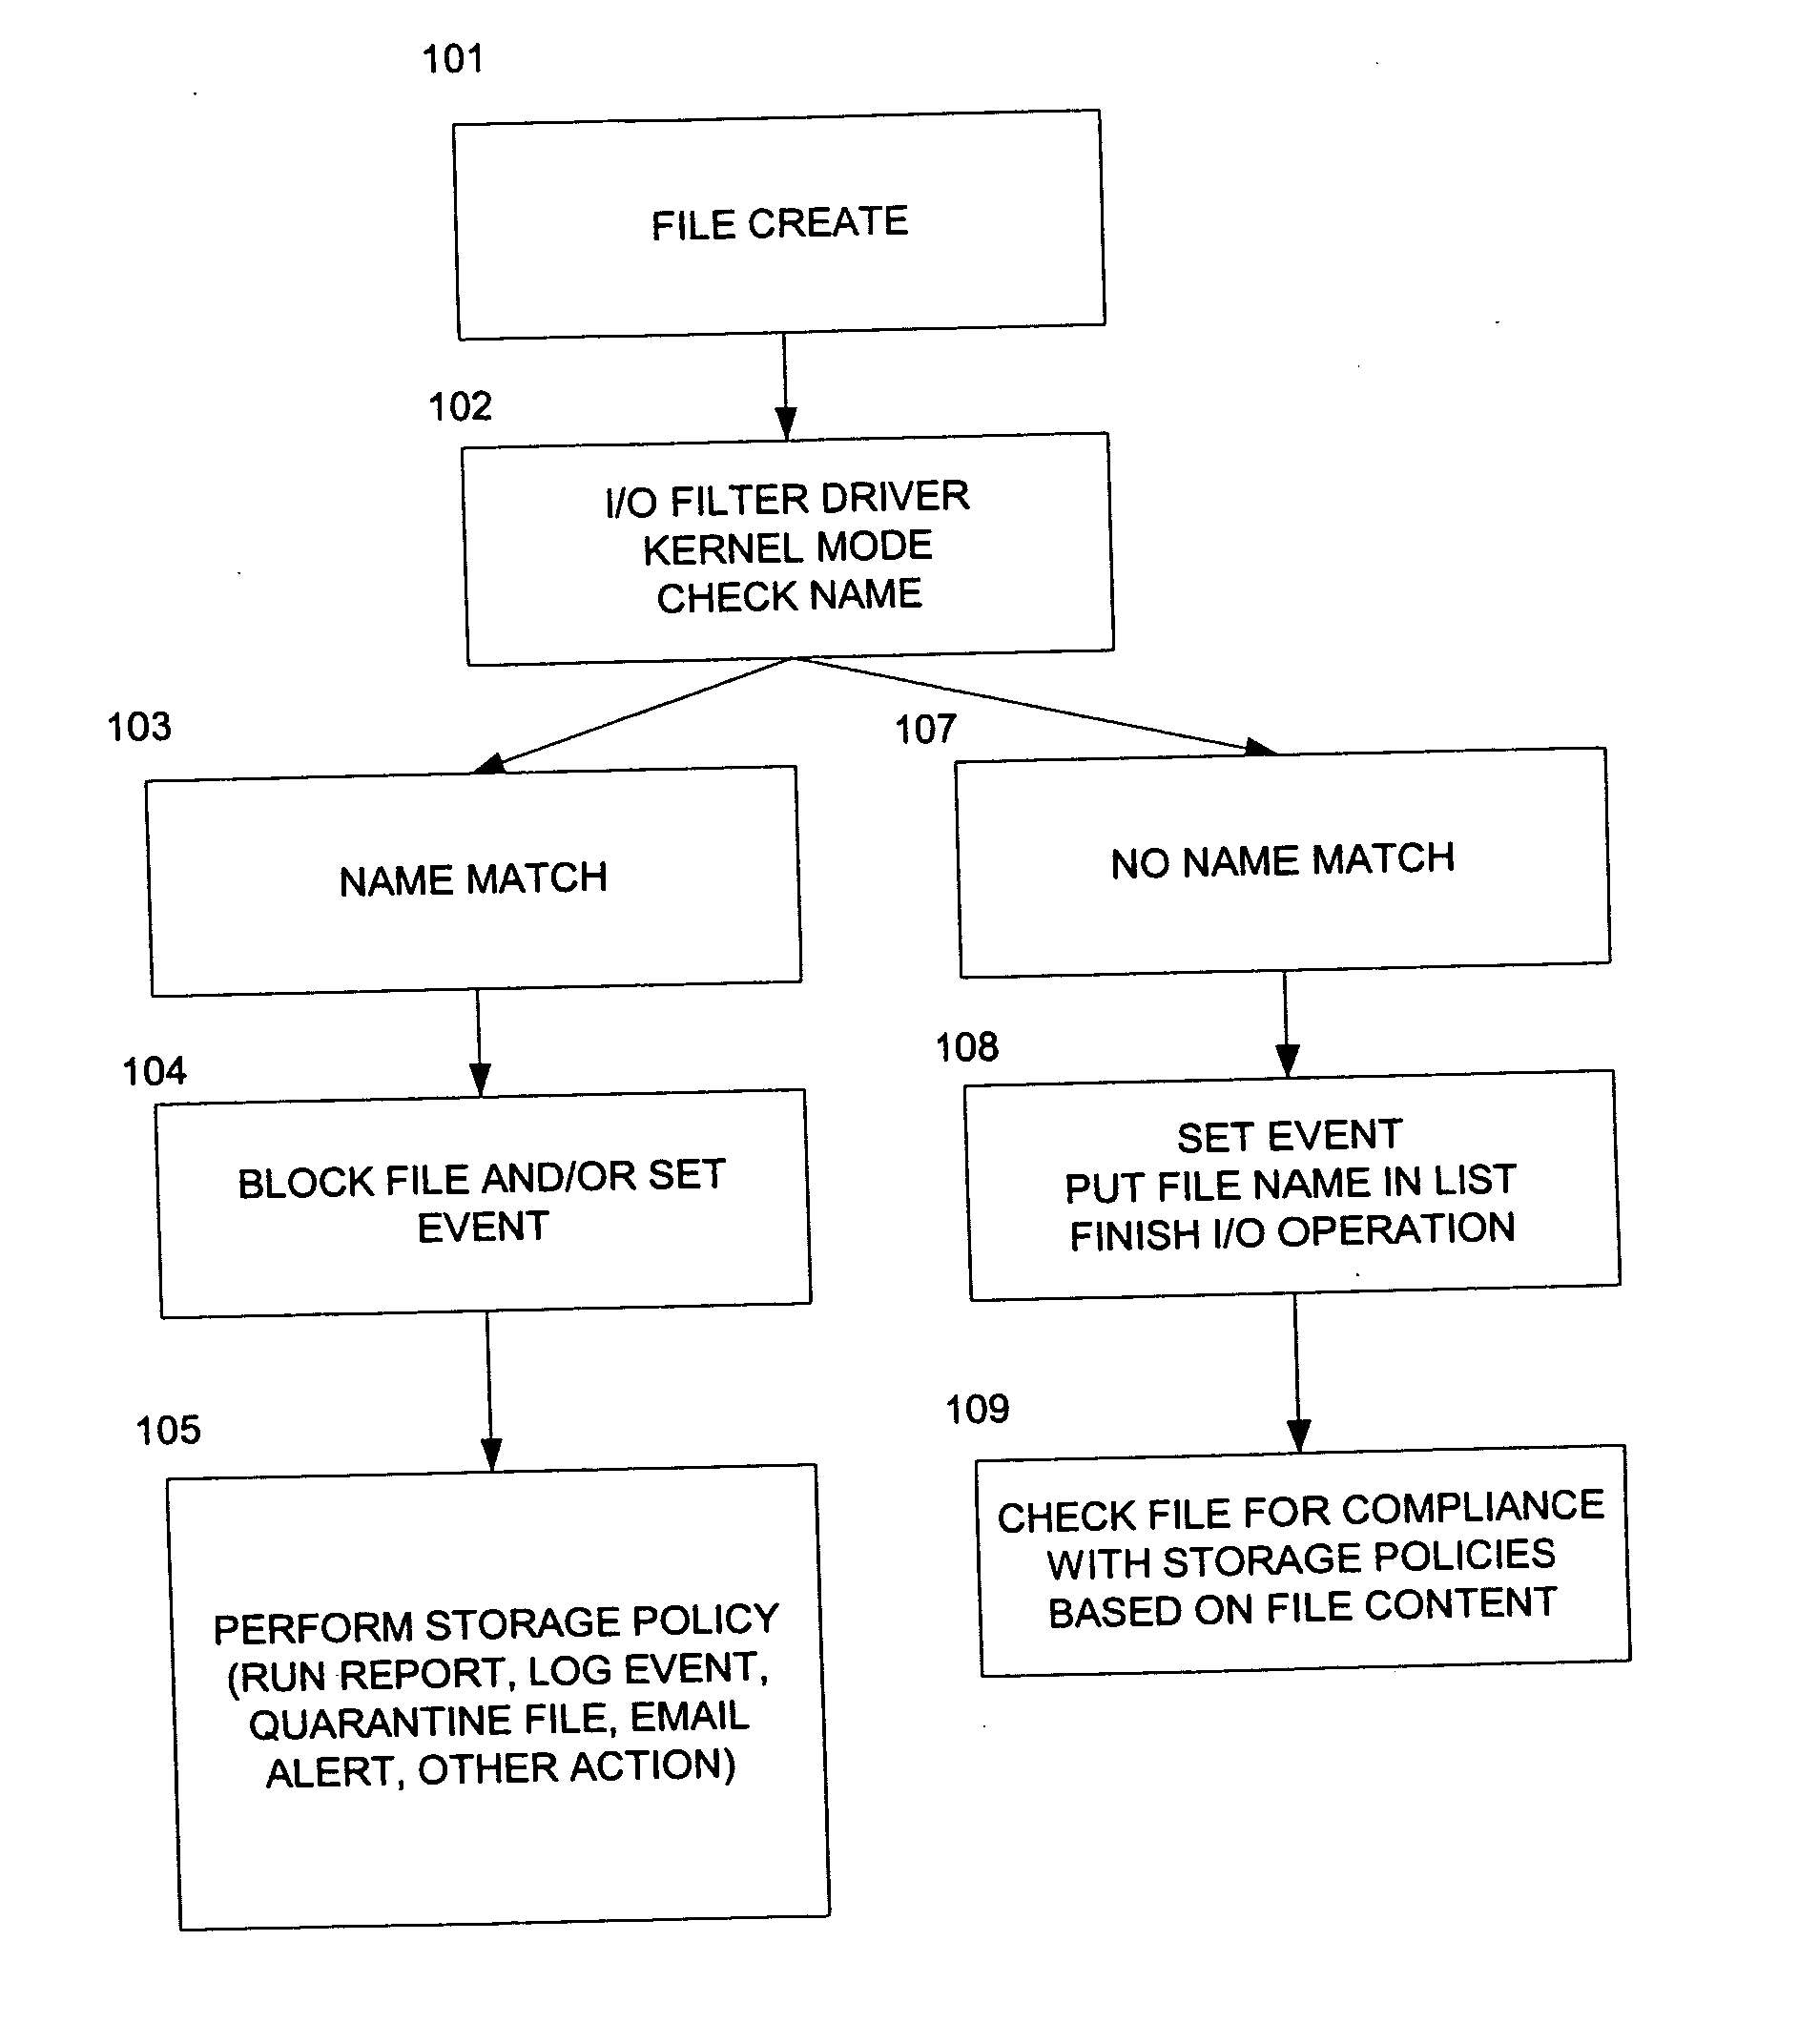 Filter driver for identifying disk files by analysis of content